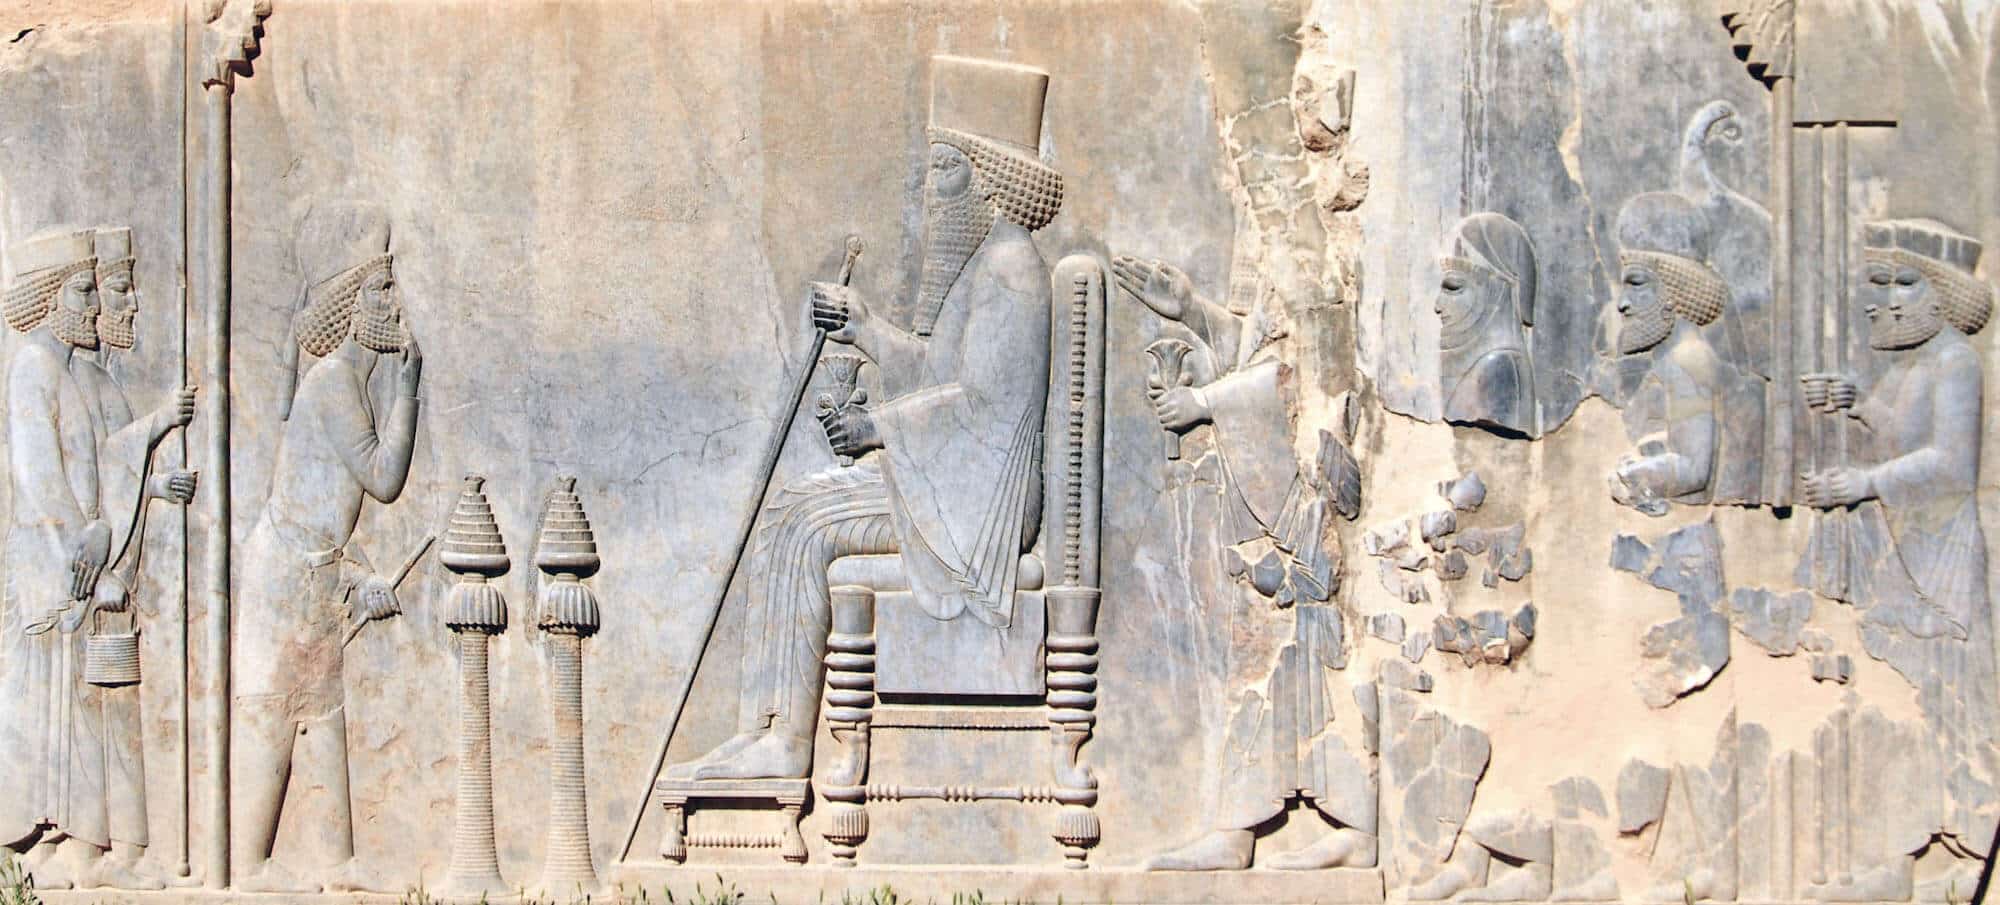 The Audience Scene on the Persepolis Treasury: The Great King (Darius I or Xerxes I) is sitting on the throne while holding a long scepter in his right hand